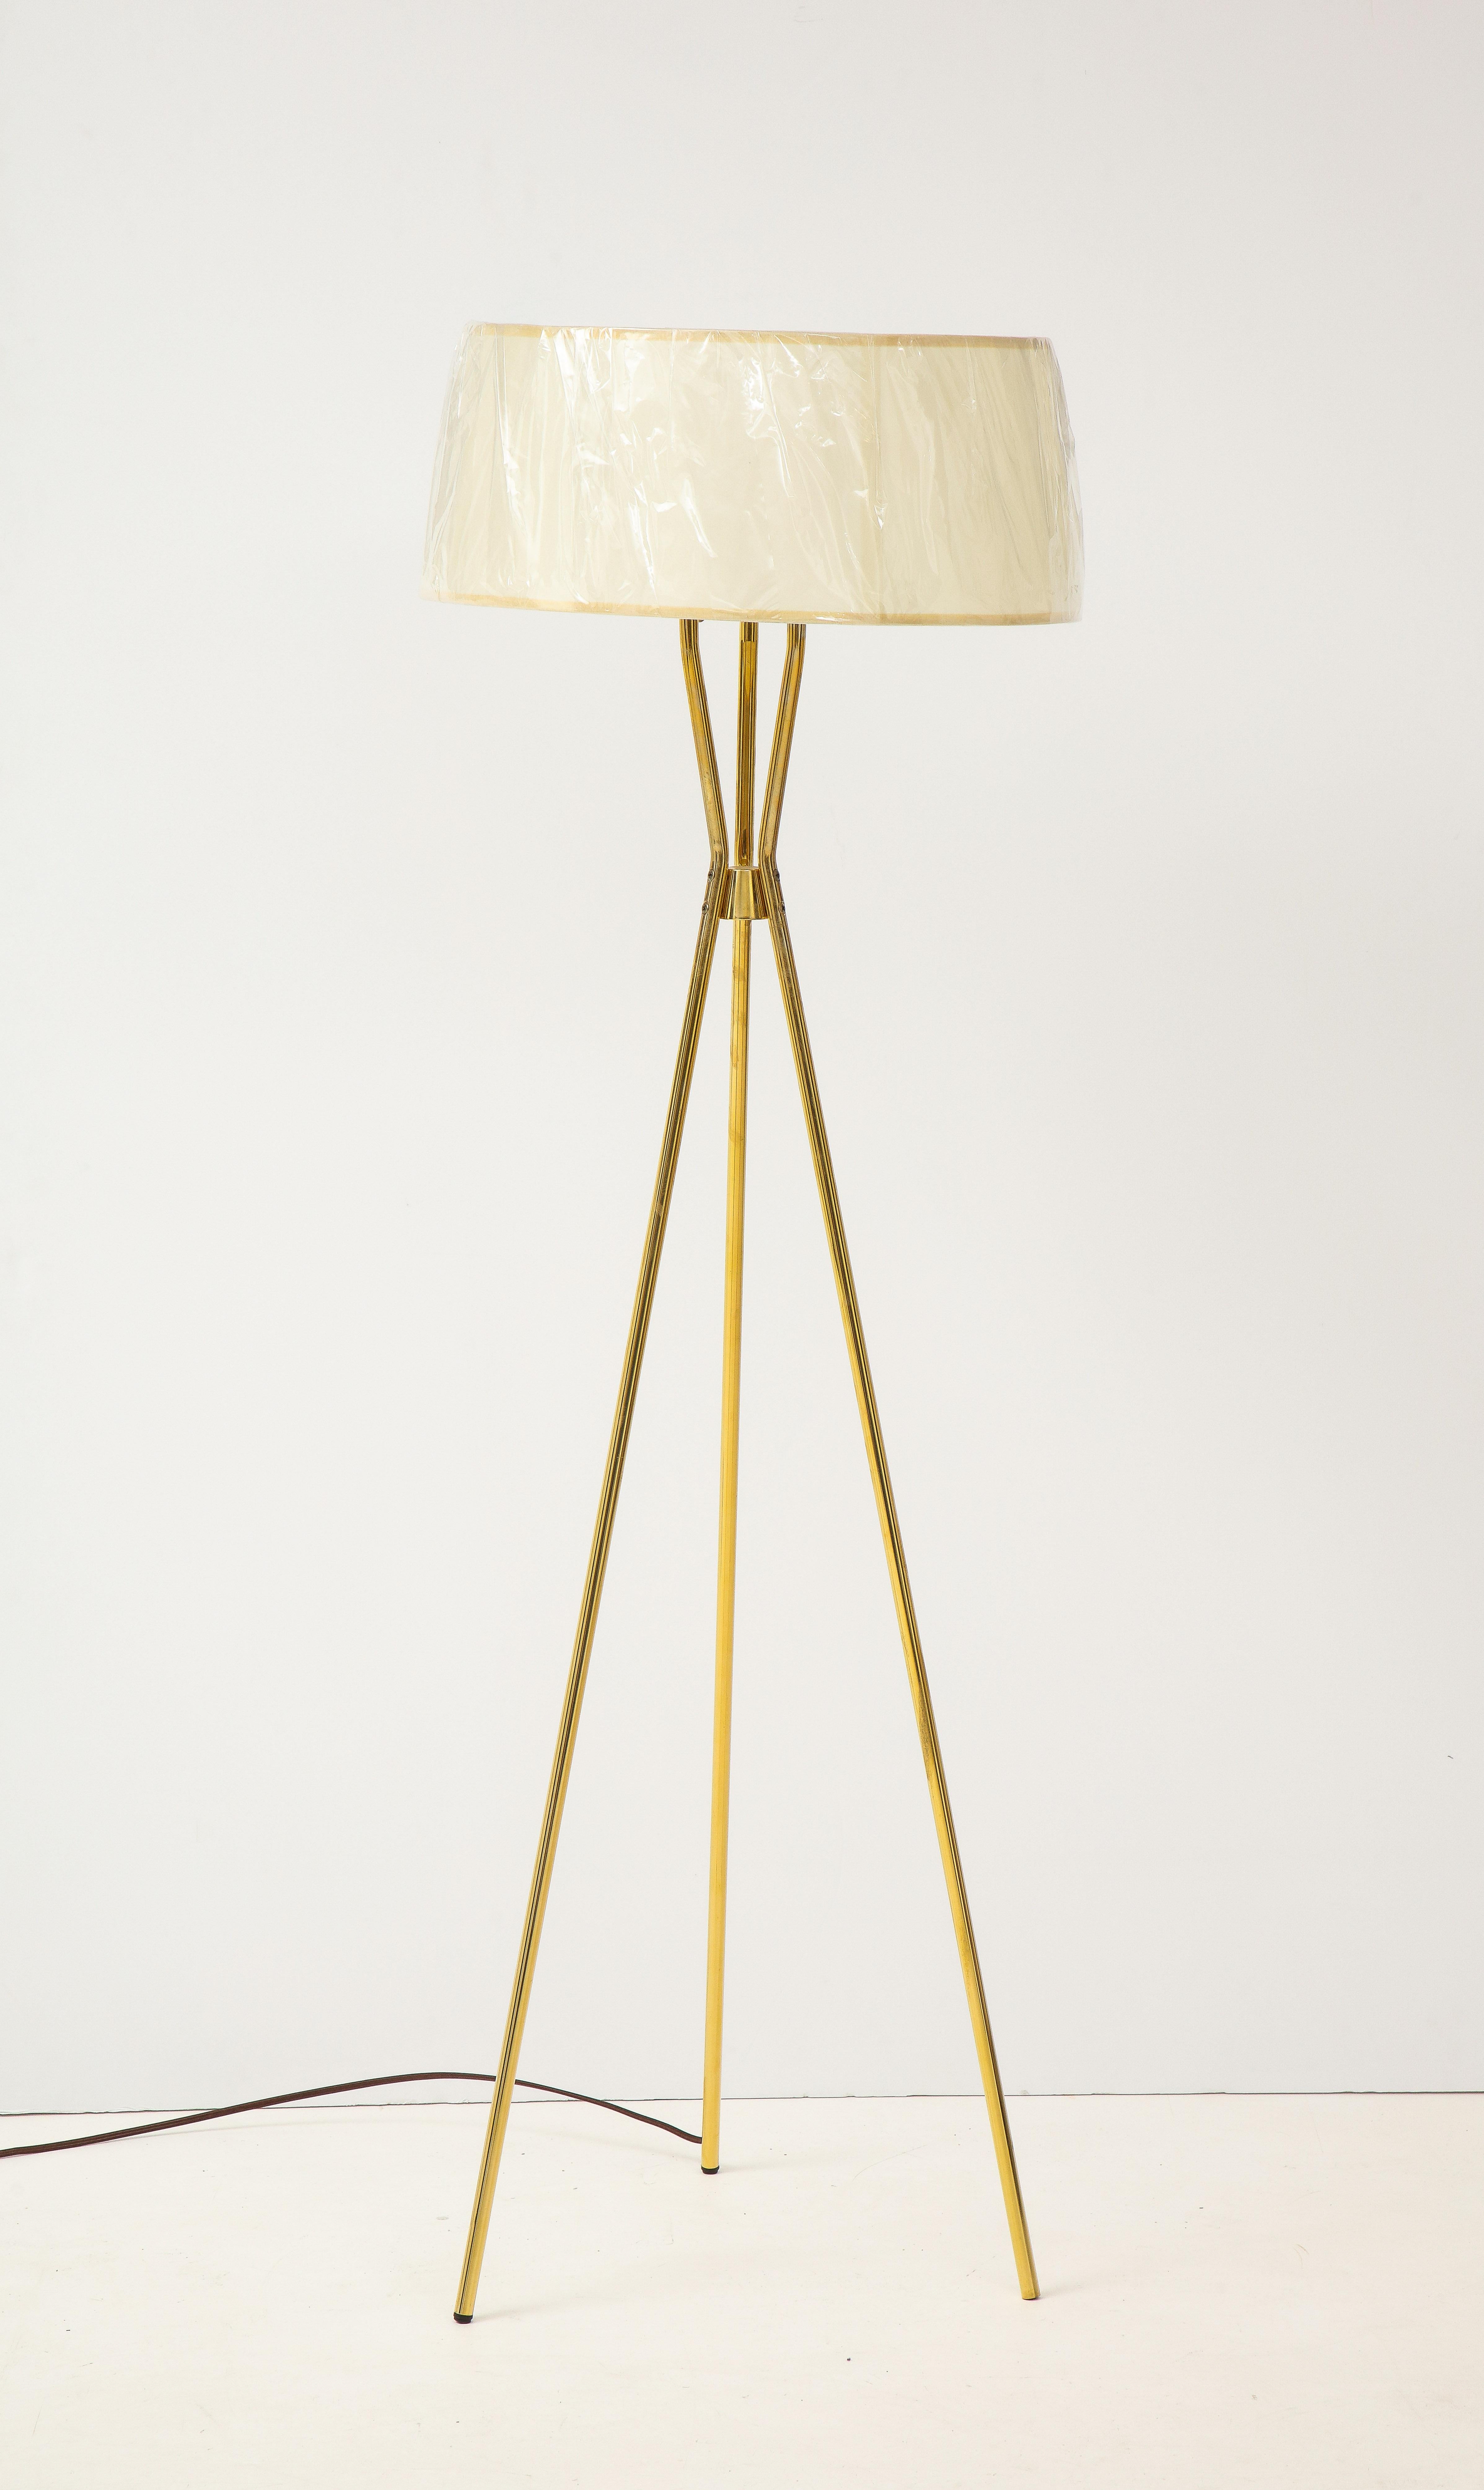 Mid-century classic streamlined brass tripod floor lamp with linen shade. Some patina to brass, professionally rewired for use in the USA. Lamp uses 3 bulbs.
Shade not included. Shade depicted measures 15 inch diameter at top, 17 inches in diameter